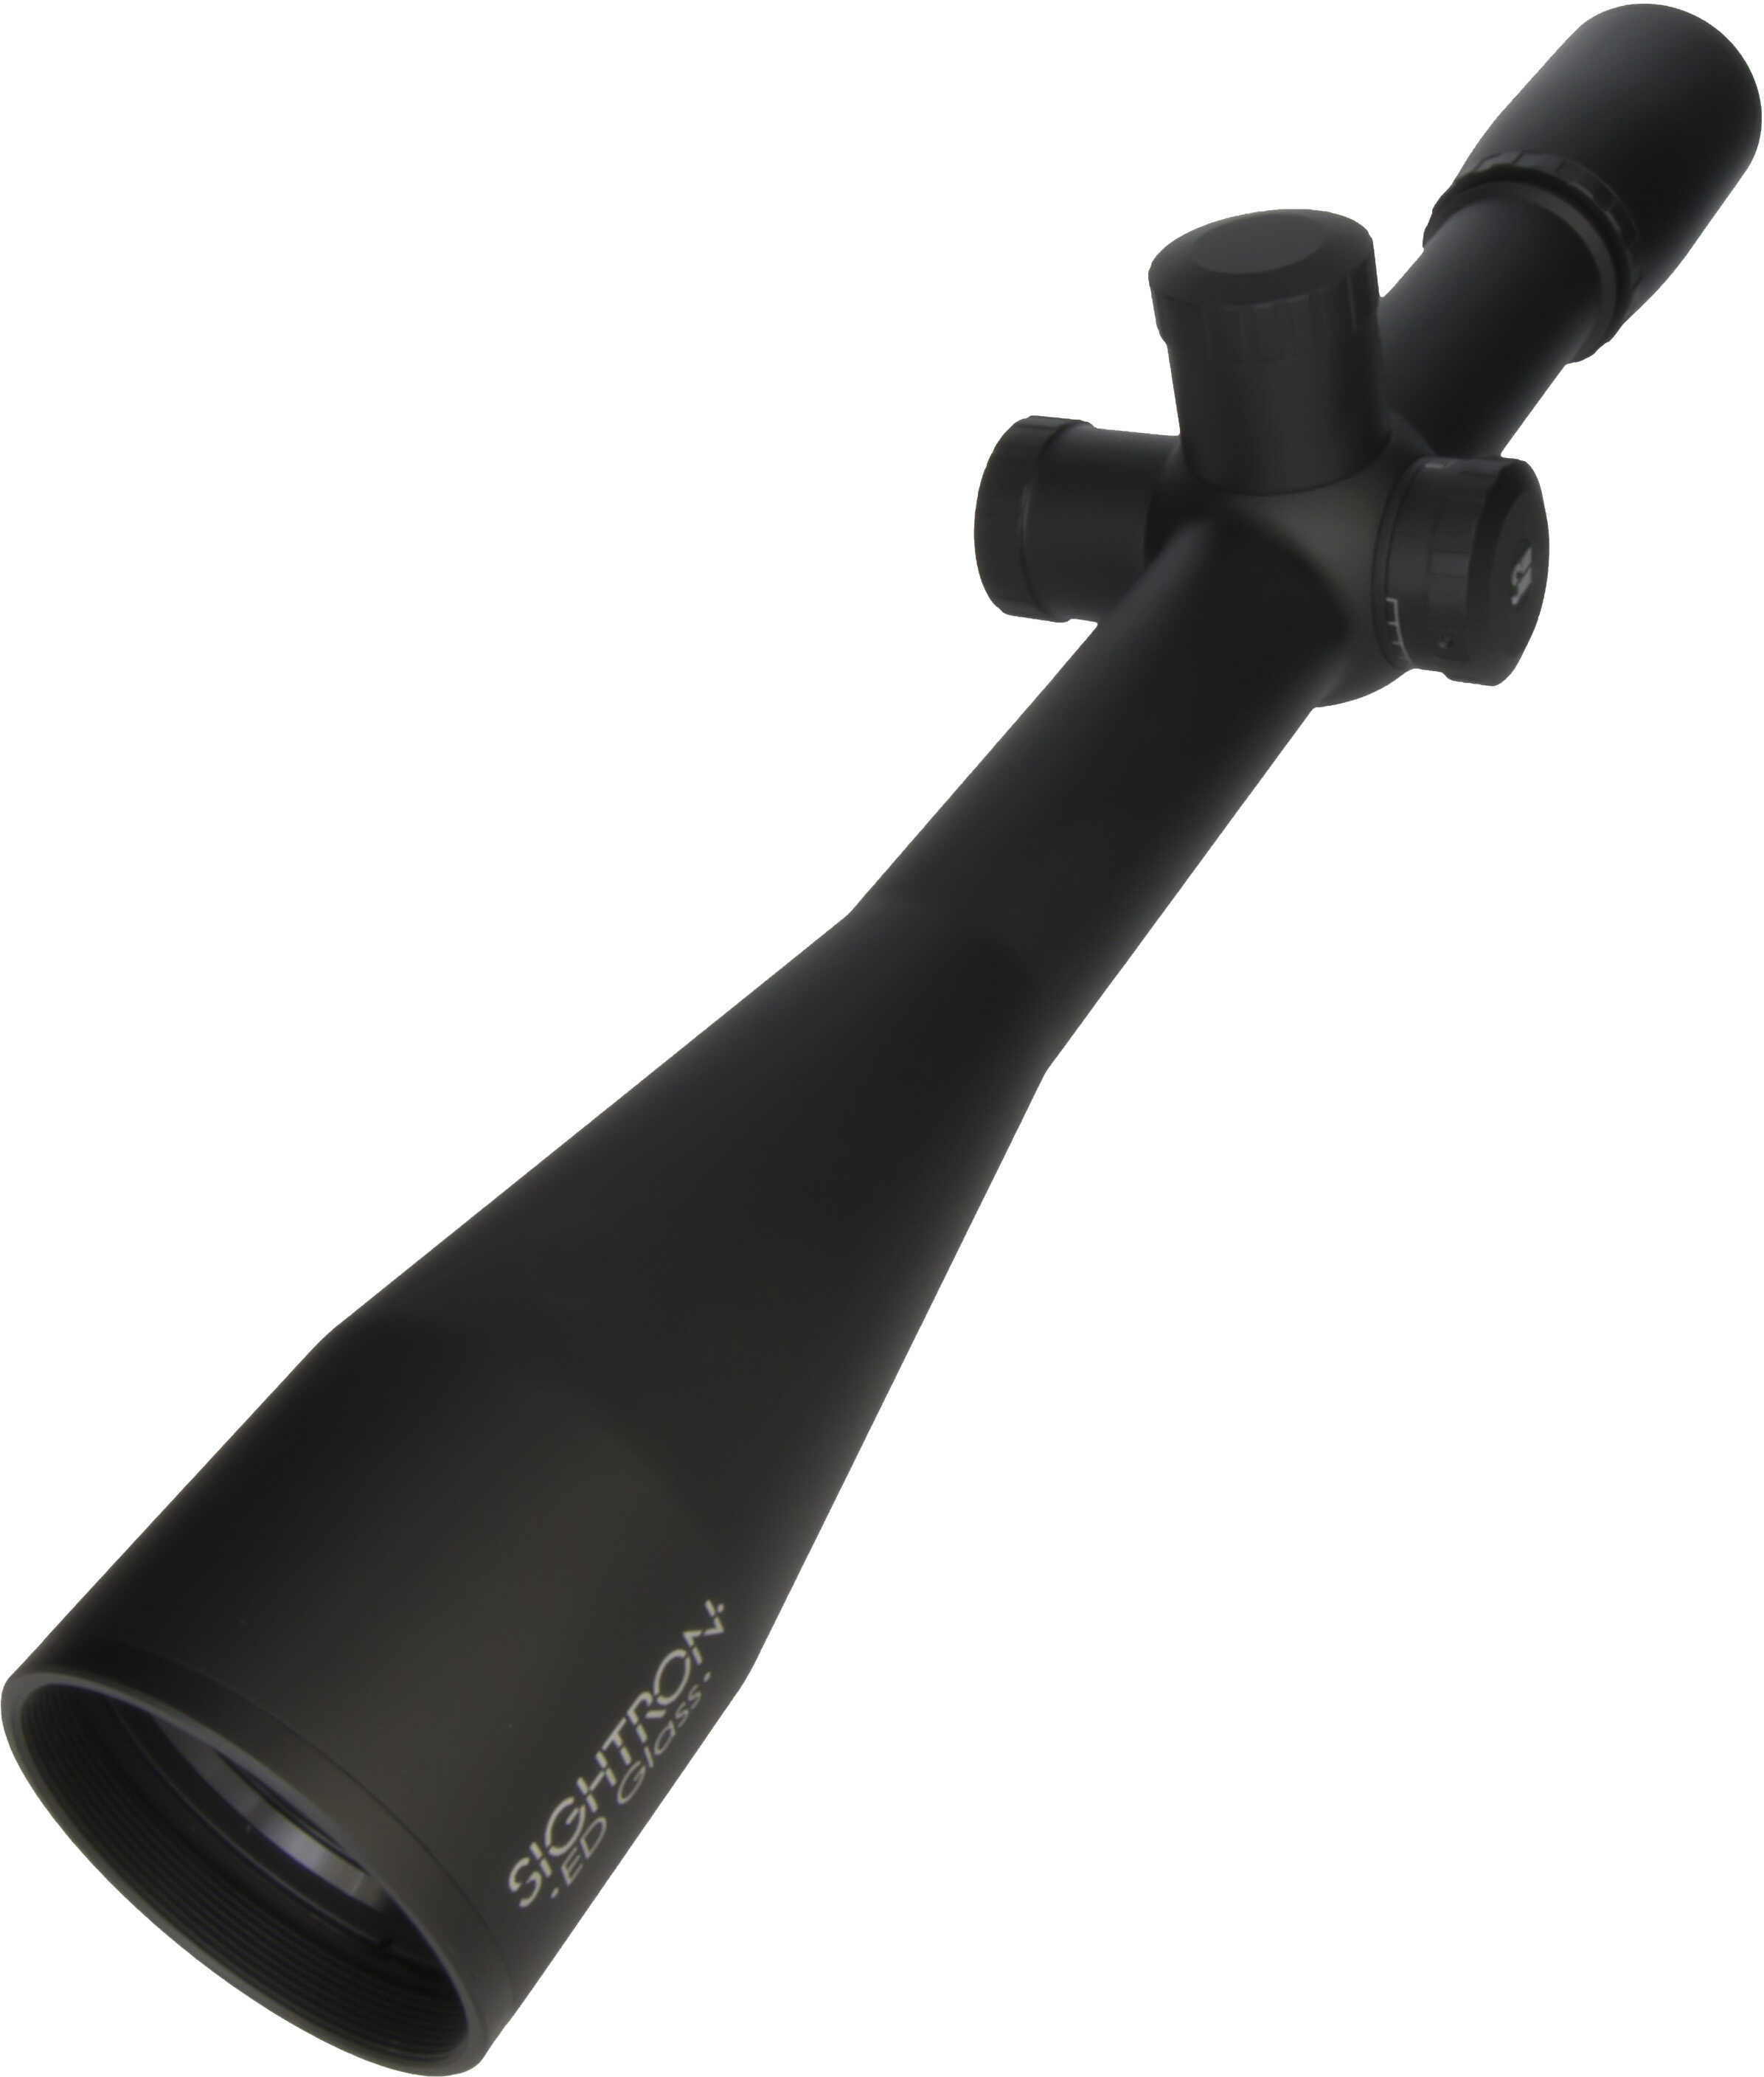 Sightron SIIISS Competition, 45x45mm, 30mm Tube, Dot Reticle, Matte Black